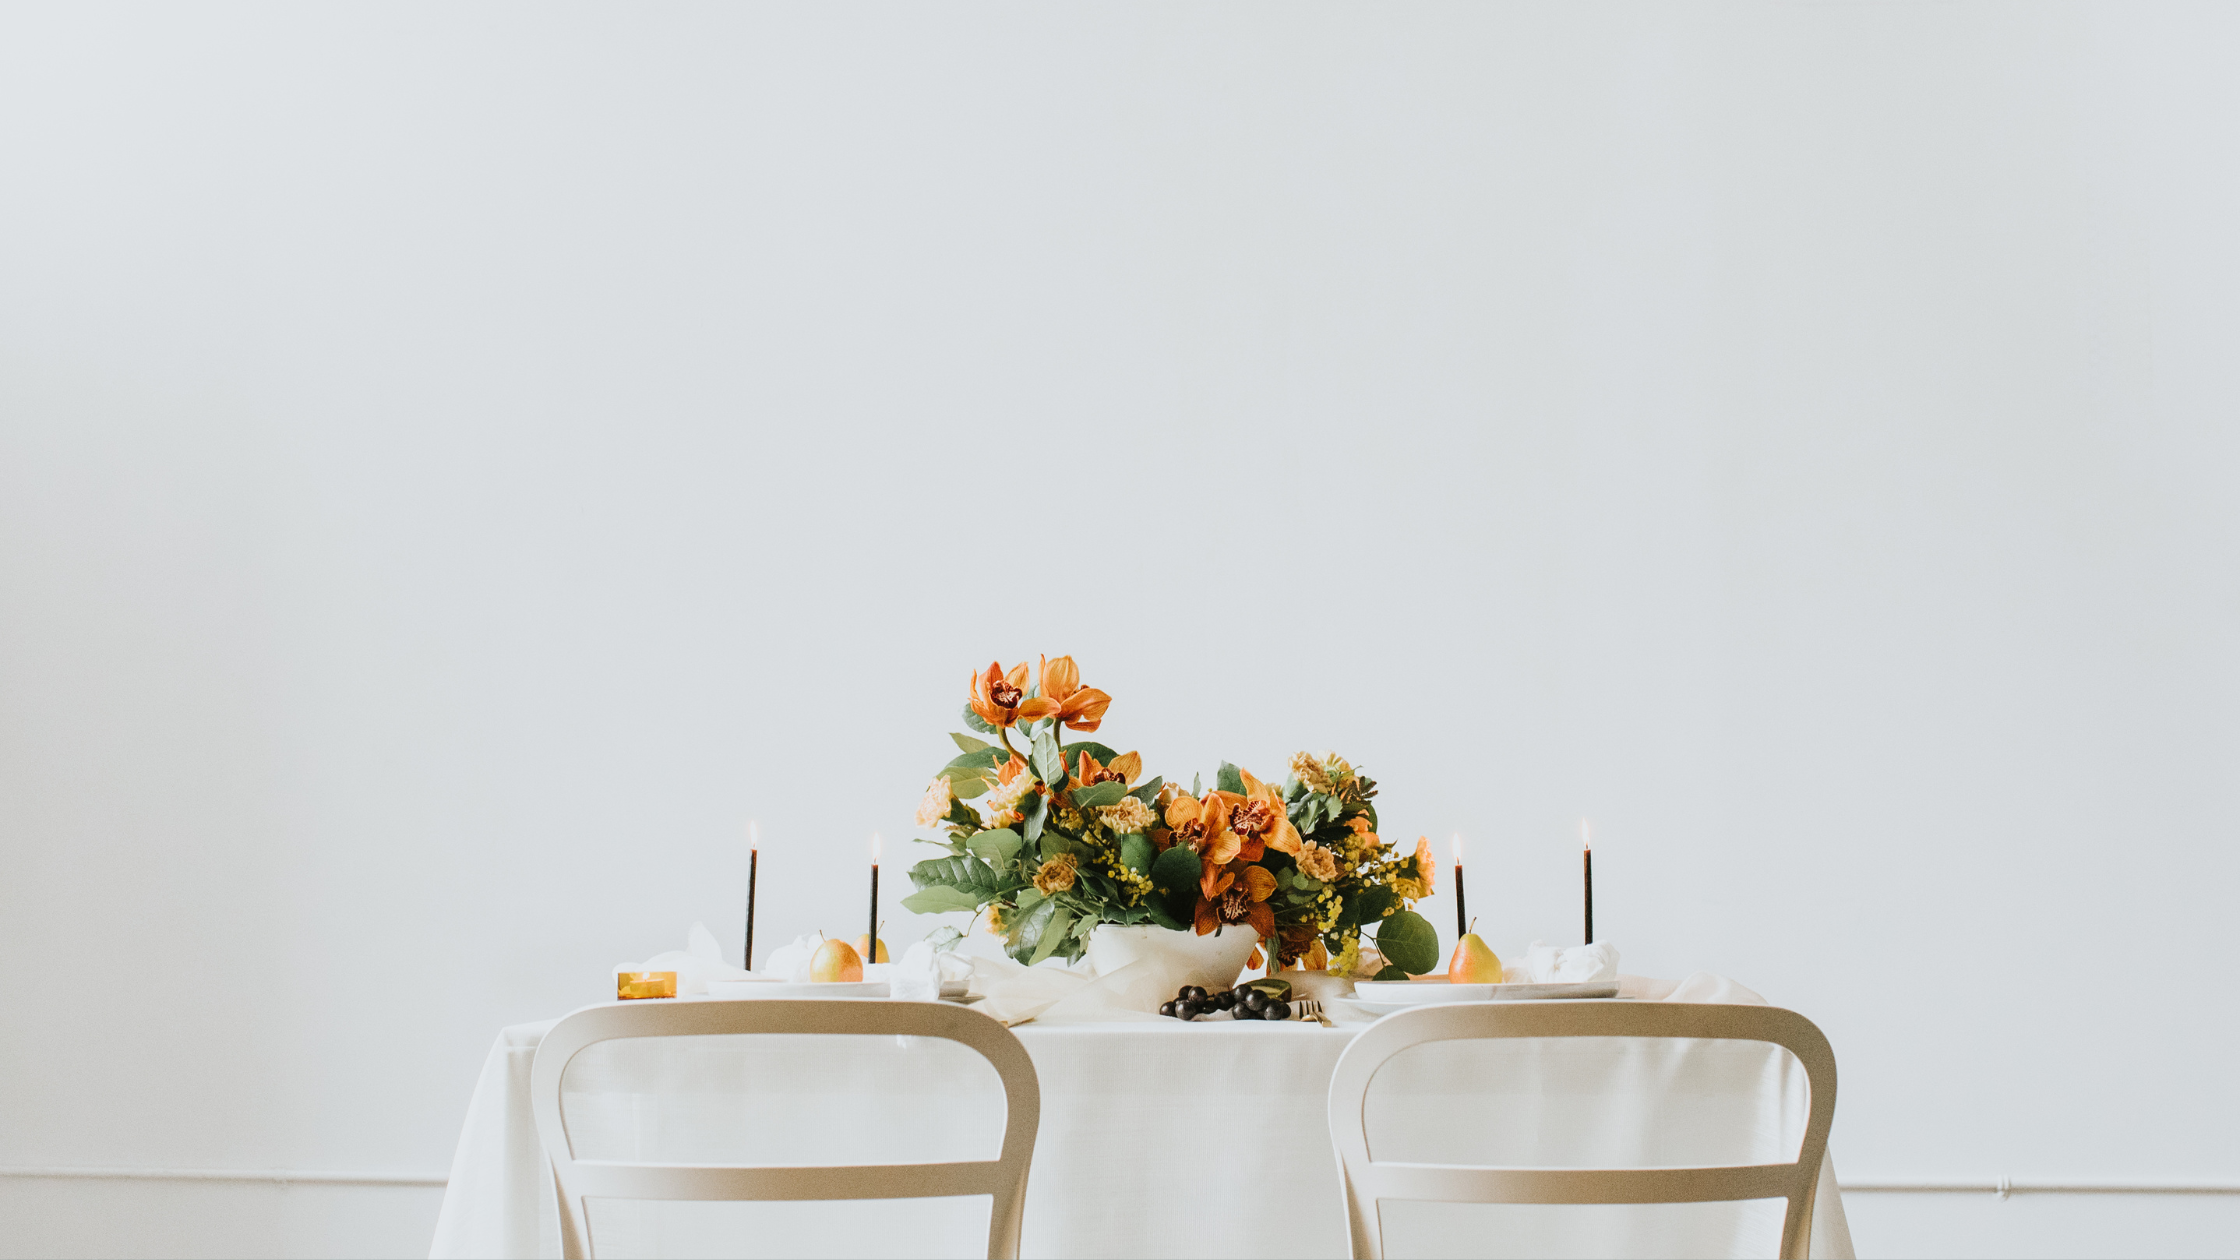 FAQs on how to set your table at home